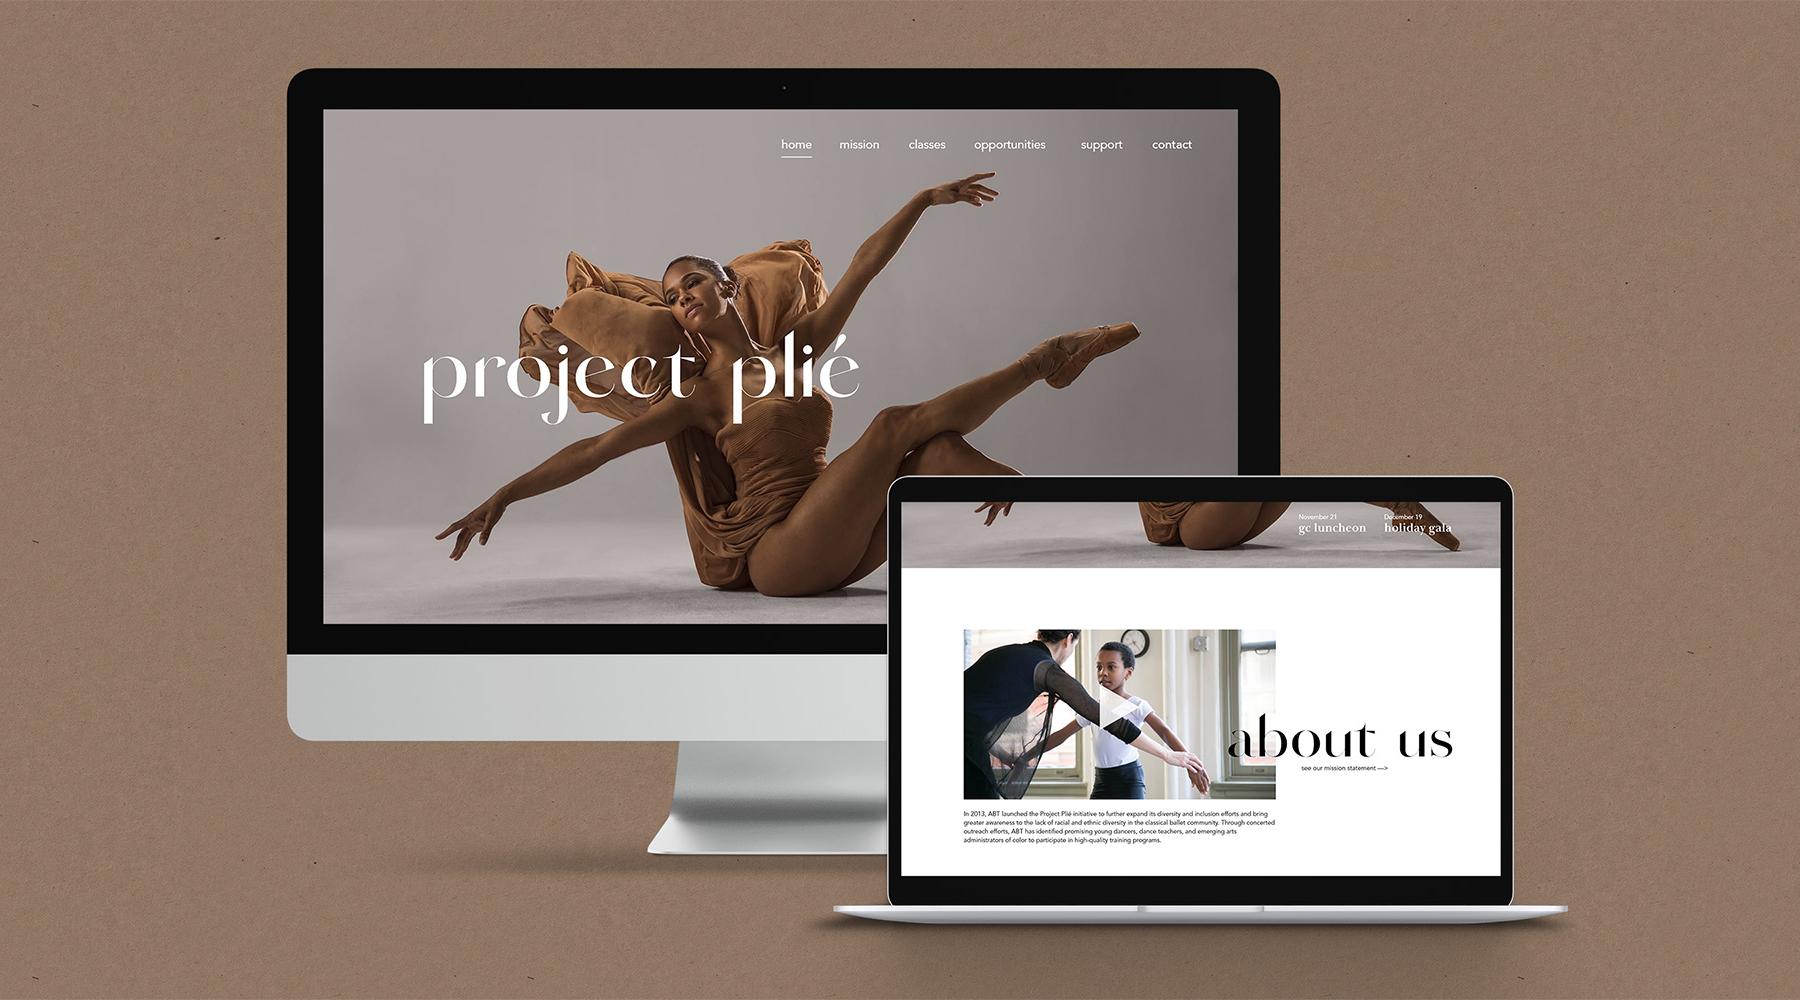 A template for a website showing a girl posing or dancing . Also there is the text: project pile.